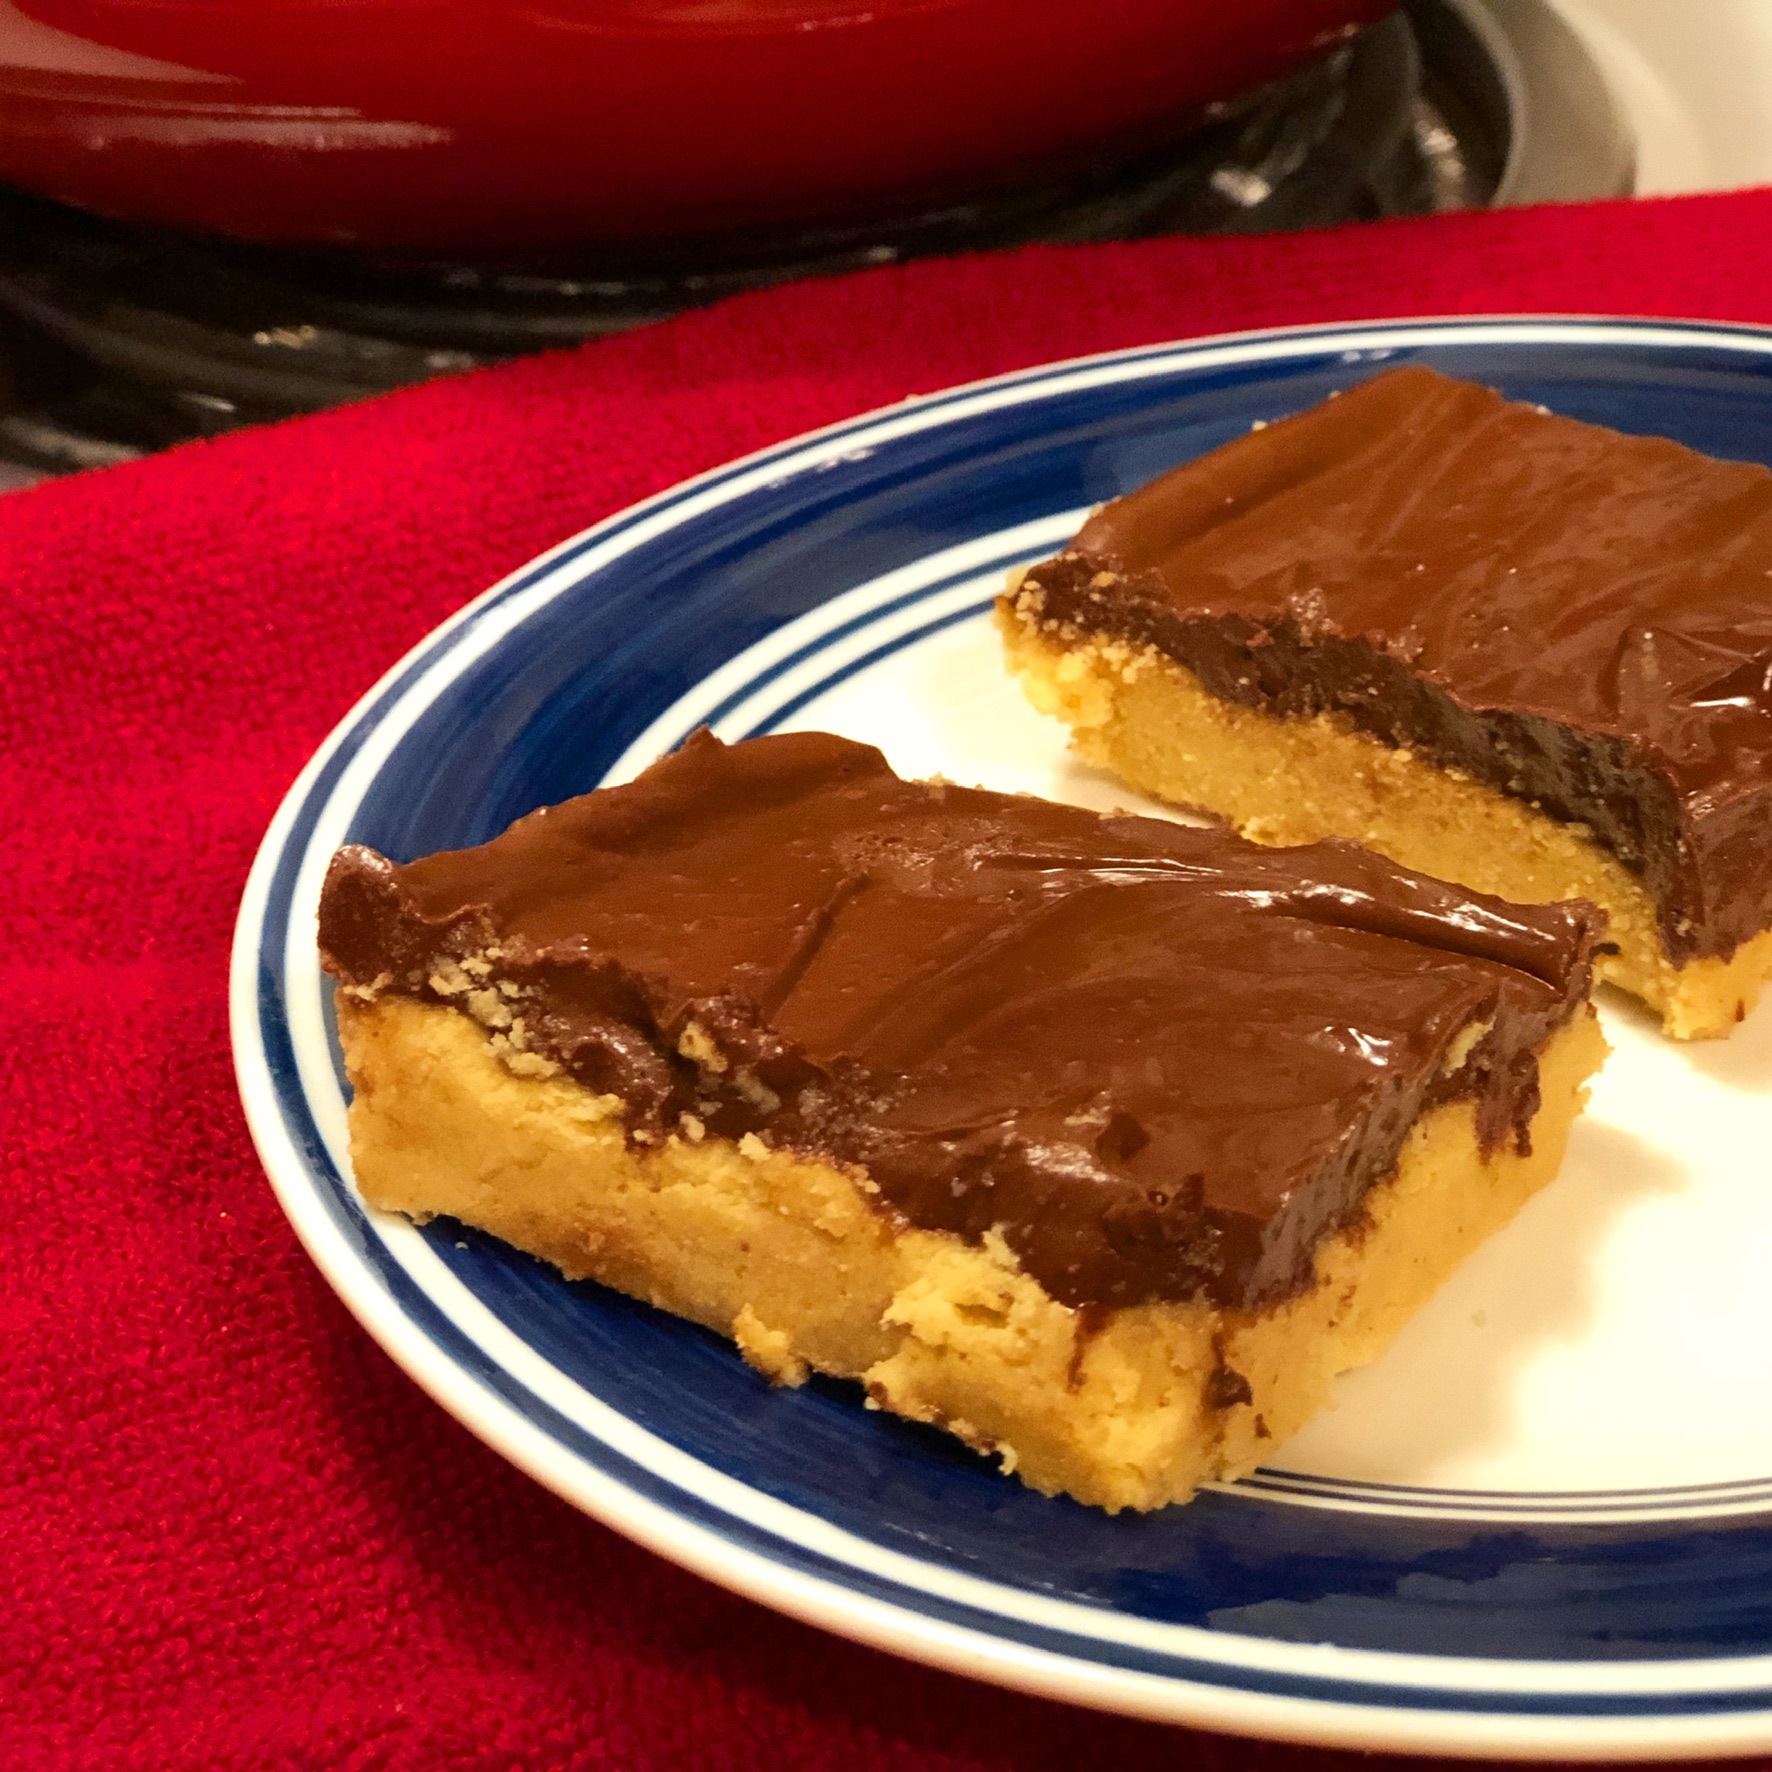 Sugar-free Low Carb Peanut Butter Candy with a Chocolate Ganache